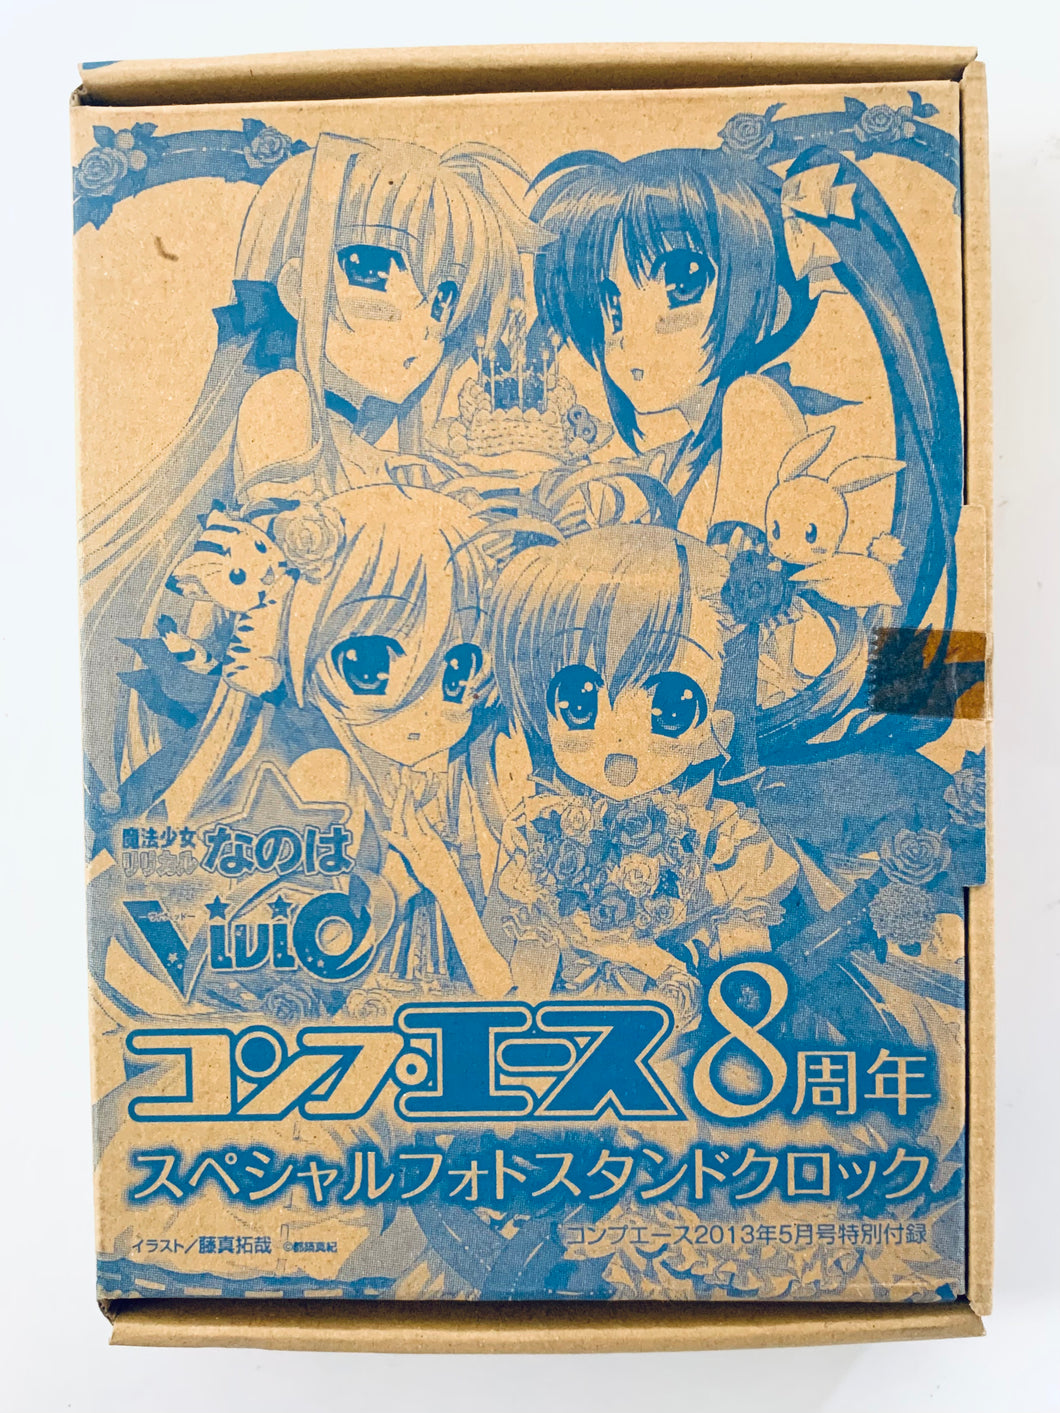 Magical Girl Lyrical Nanoha Innocent Comp Ace 8th Anniversary Special Photo Stand Clock May 2013 special appendix